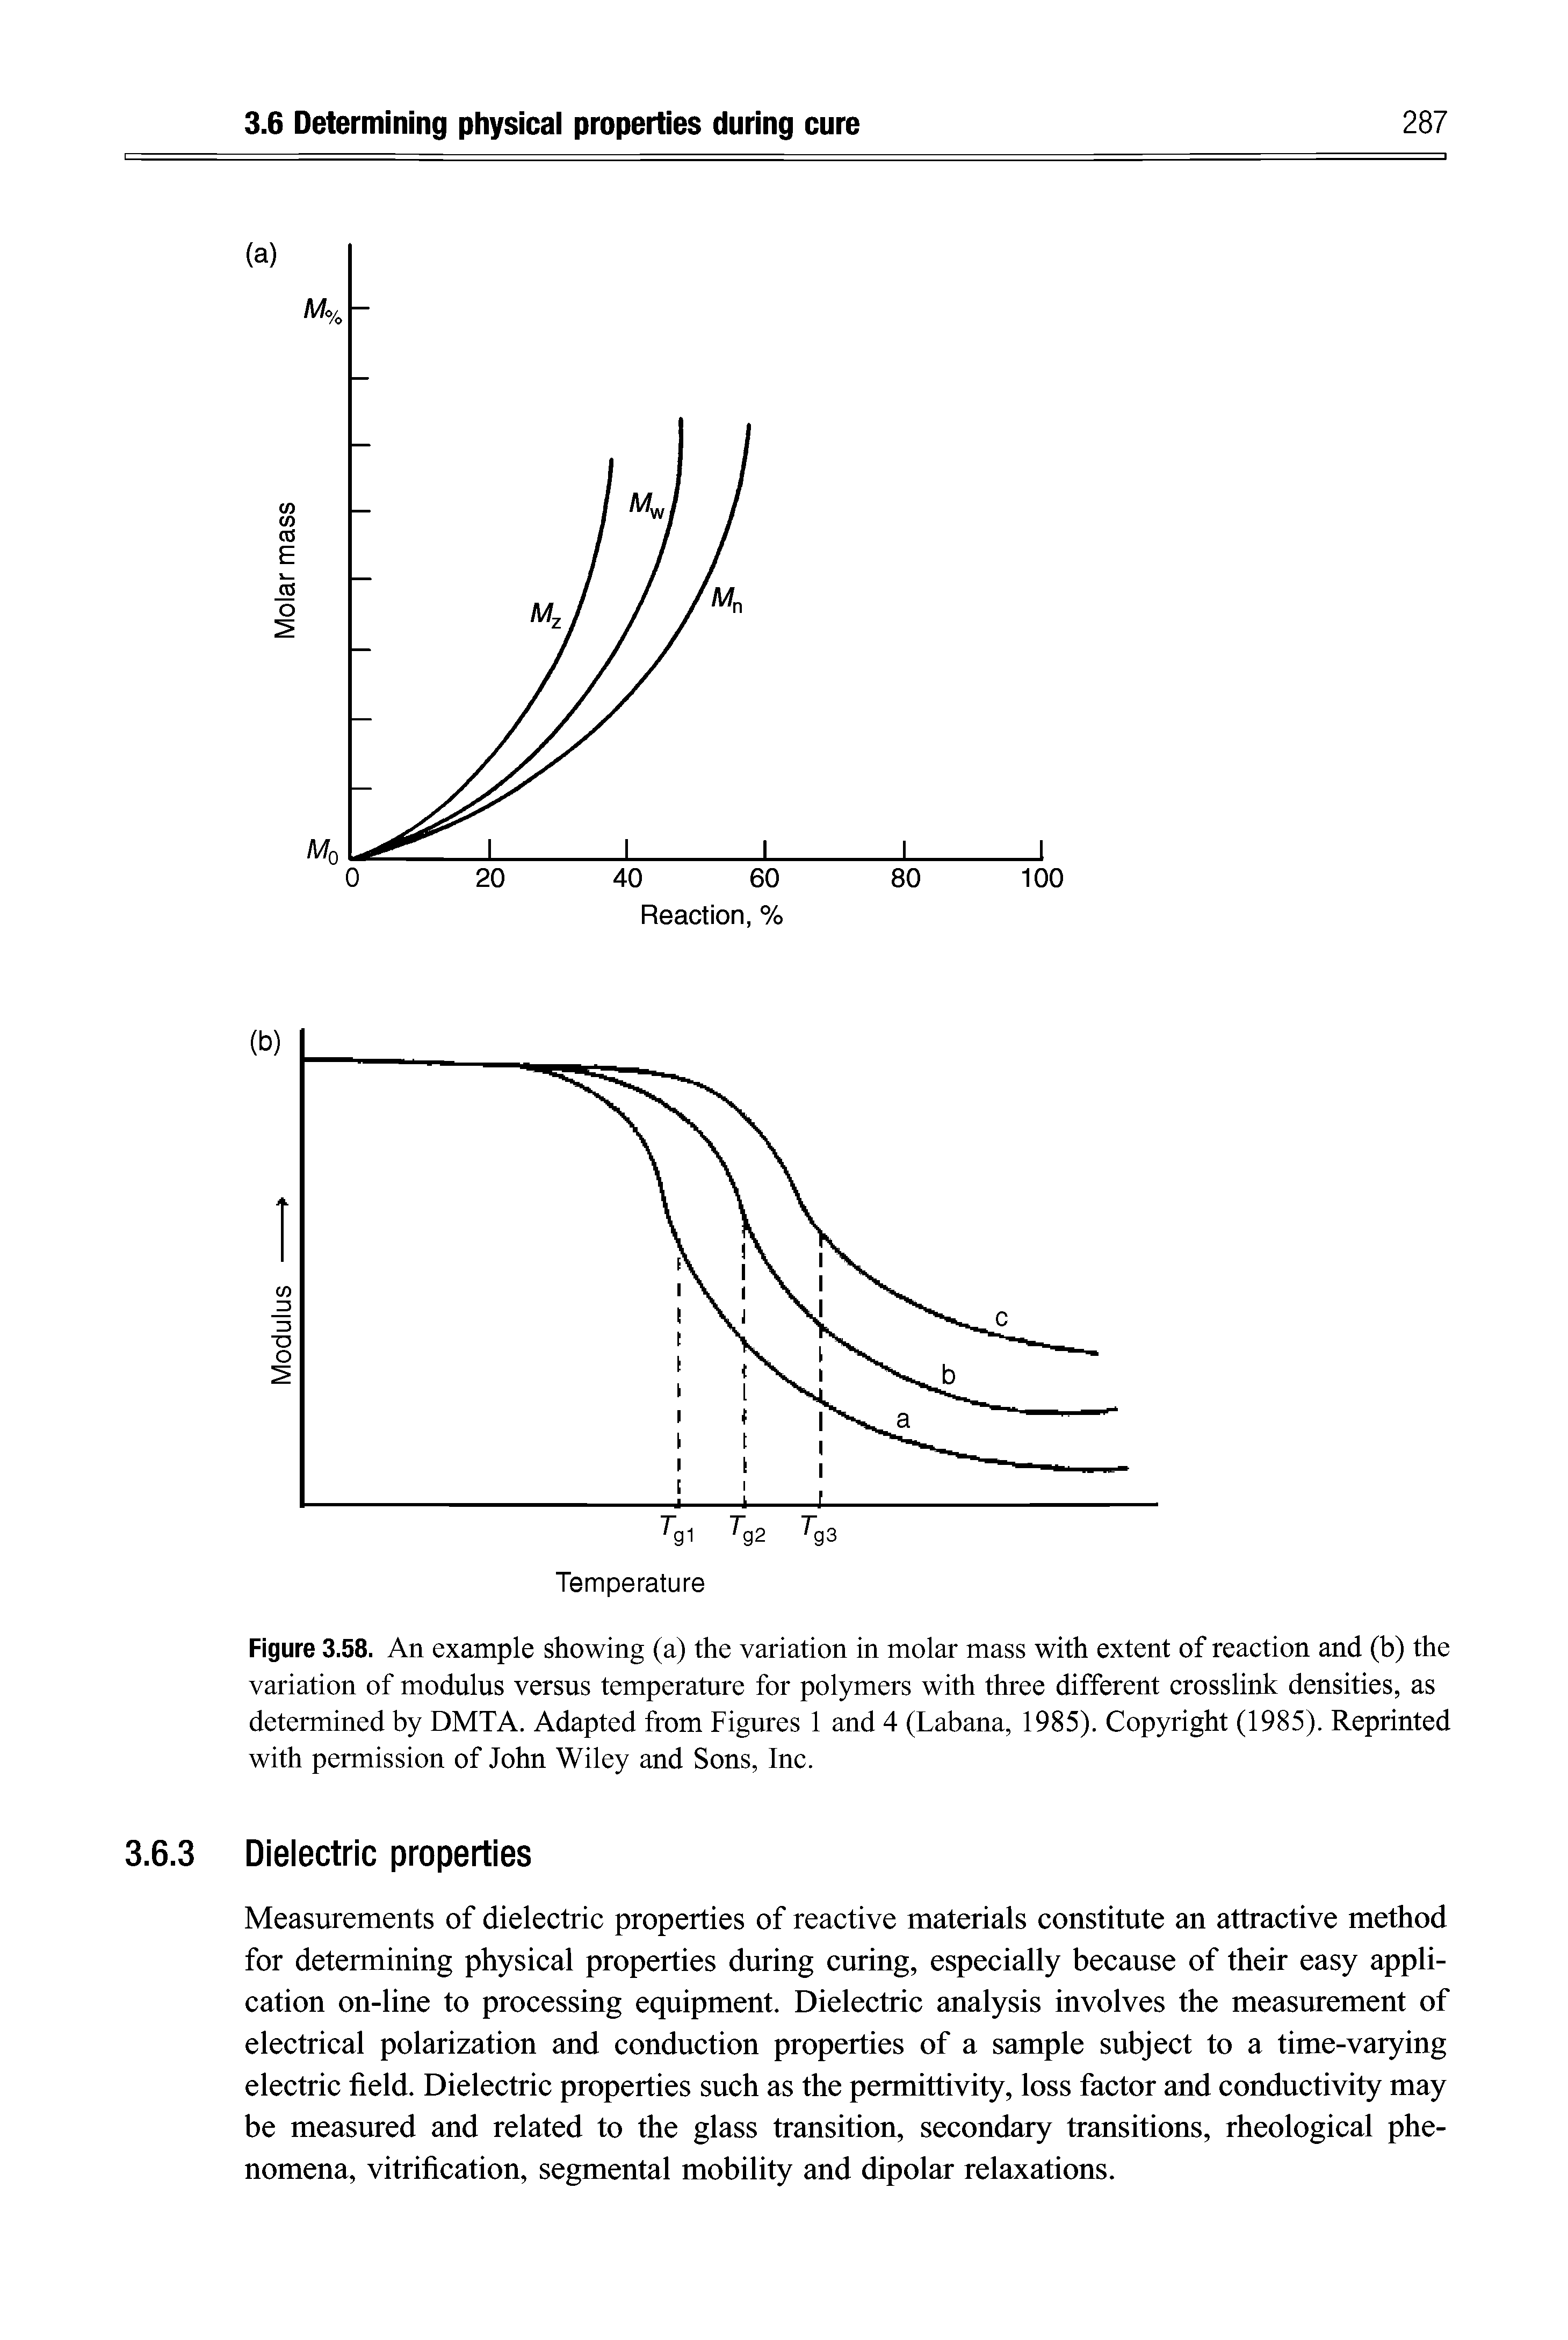 Figure 3.58. An example showing (a) the variation in molar mass with extent of reaetion and (b) the variation of modulus versus temperature for polymers with three different crosslink densities, as determined by DMTA. Adapted from Figures 1 and 4 (Labana, 1985). Copyright (1985). Reprinted with permission of John Wiley and Sons, Inc.